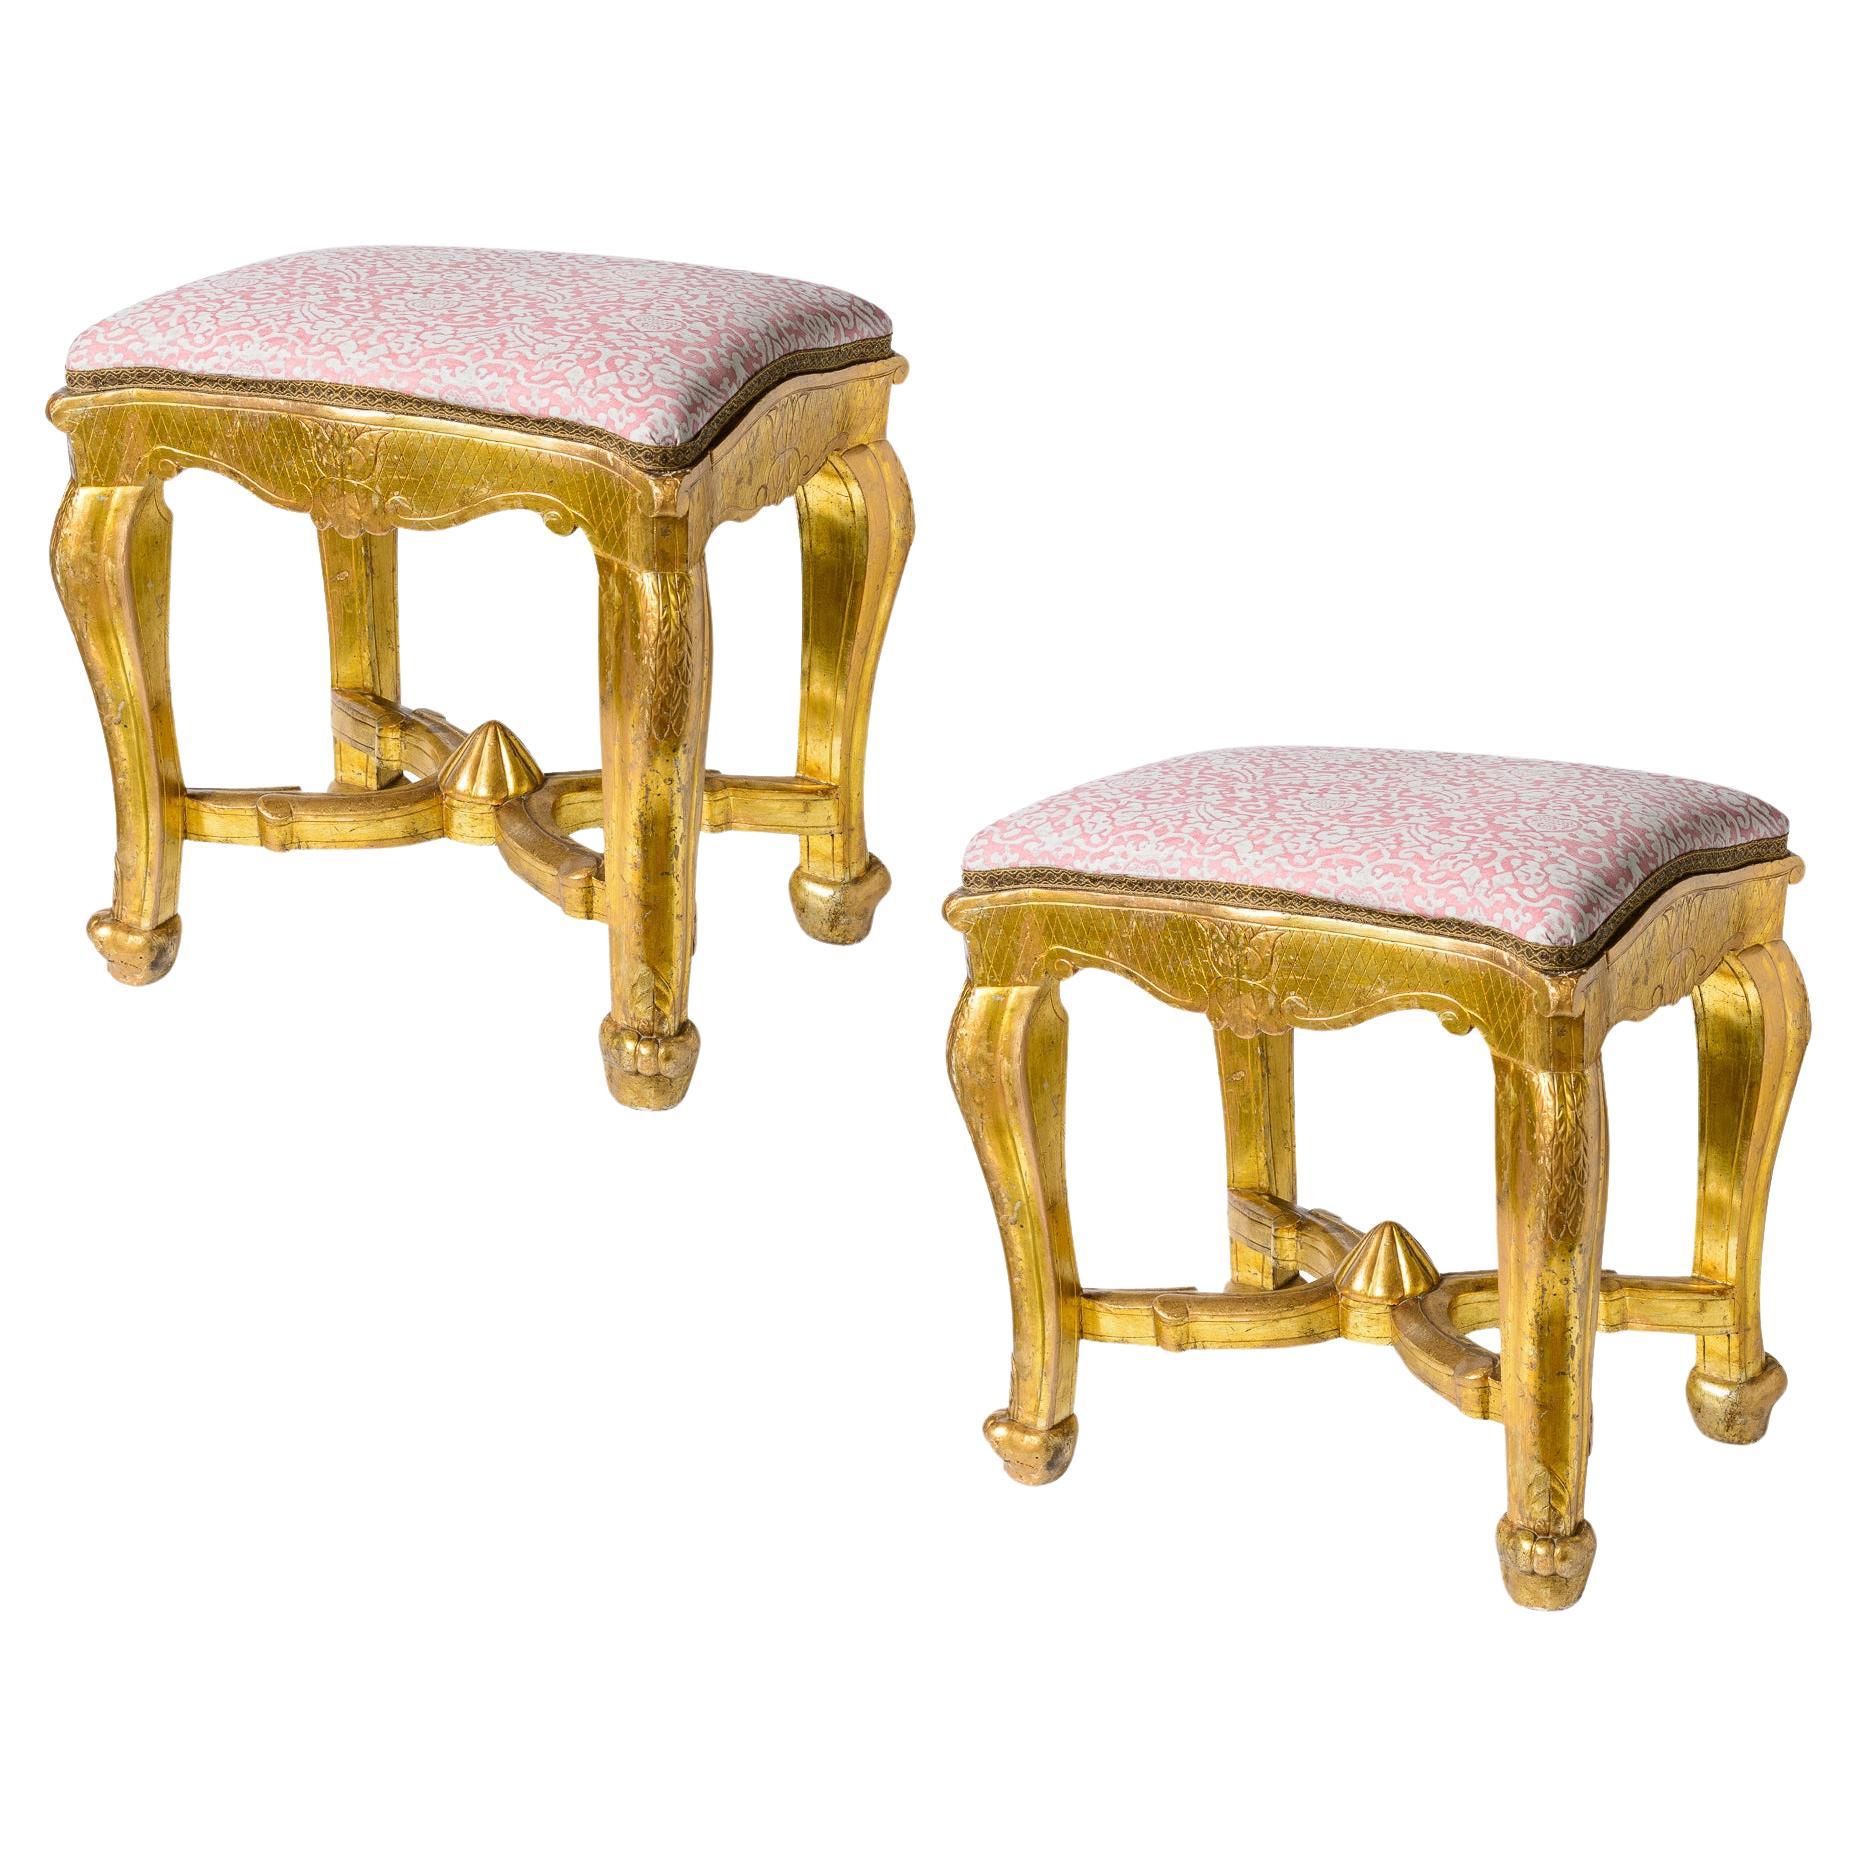 Italian 18th-Century Giltwood Stools With Fortuny Fabric, a -Pair